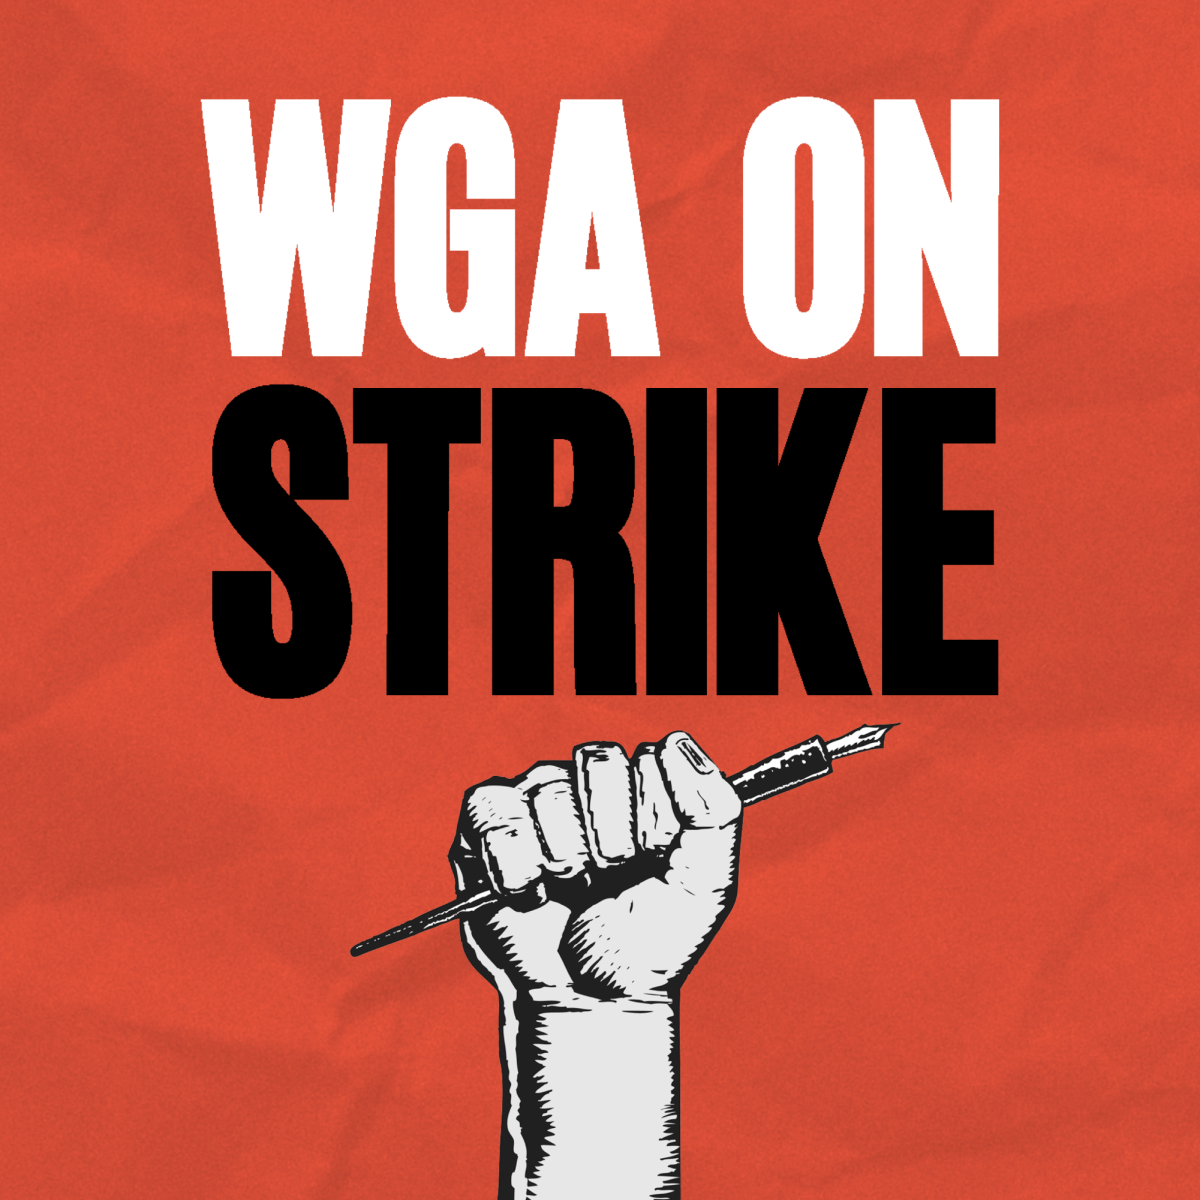 https://www.google.com/url?sa=i&url=https%3A%2F%2Fobjectivejournalism.org%2F2023%2F05%2Fthe-wga-strike-is-an-opportunity-for-journalists-to-show-solidarity%2F&psig=AOvVaw3AorbArbTyfRBUkG3RcJpR&ust=1695916953179000&source=images&cd=vfe&opi=89978449&ved=0CA0QjRxqFwoTCNi_y9uVy4EDFQAAAAAdAAAAABAD